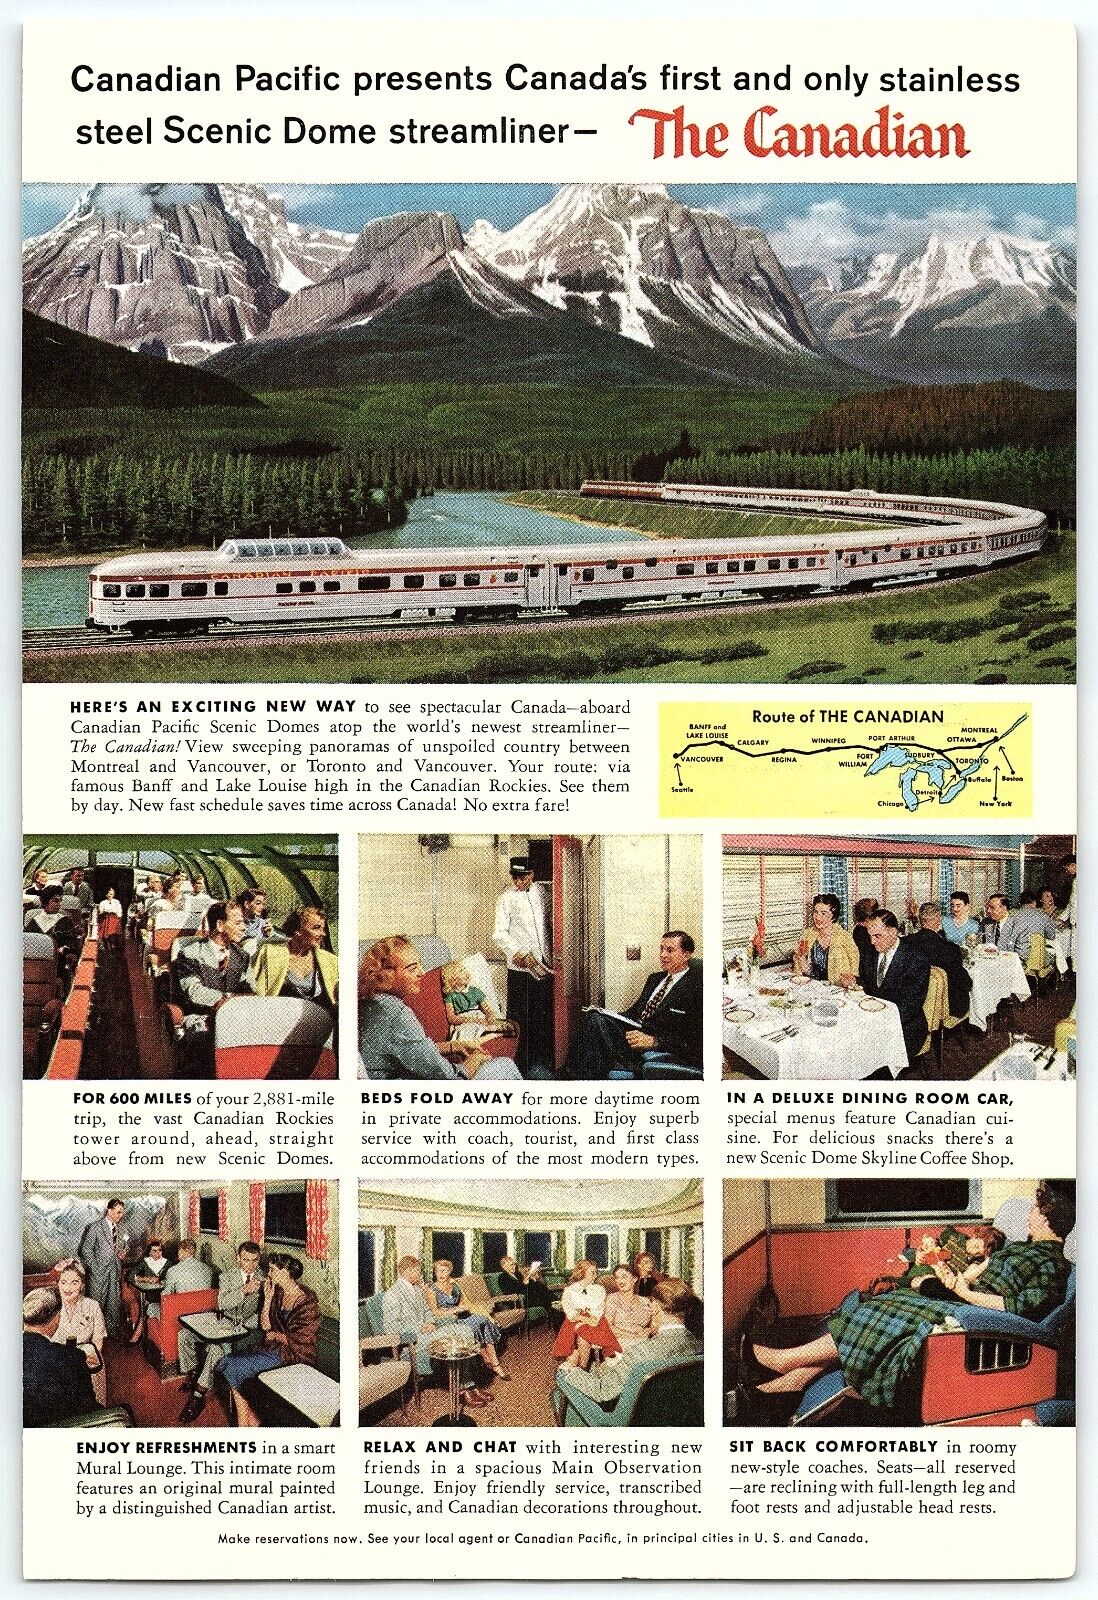 1950s CANADIAN PACIFIC THE CANADIAN SCENIC DOME STREAMLINER PRINT AD Z6037